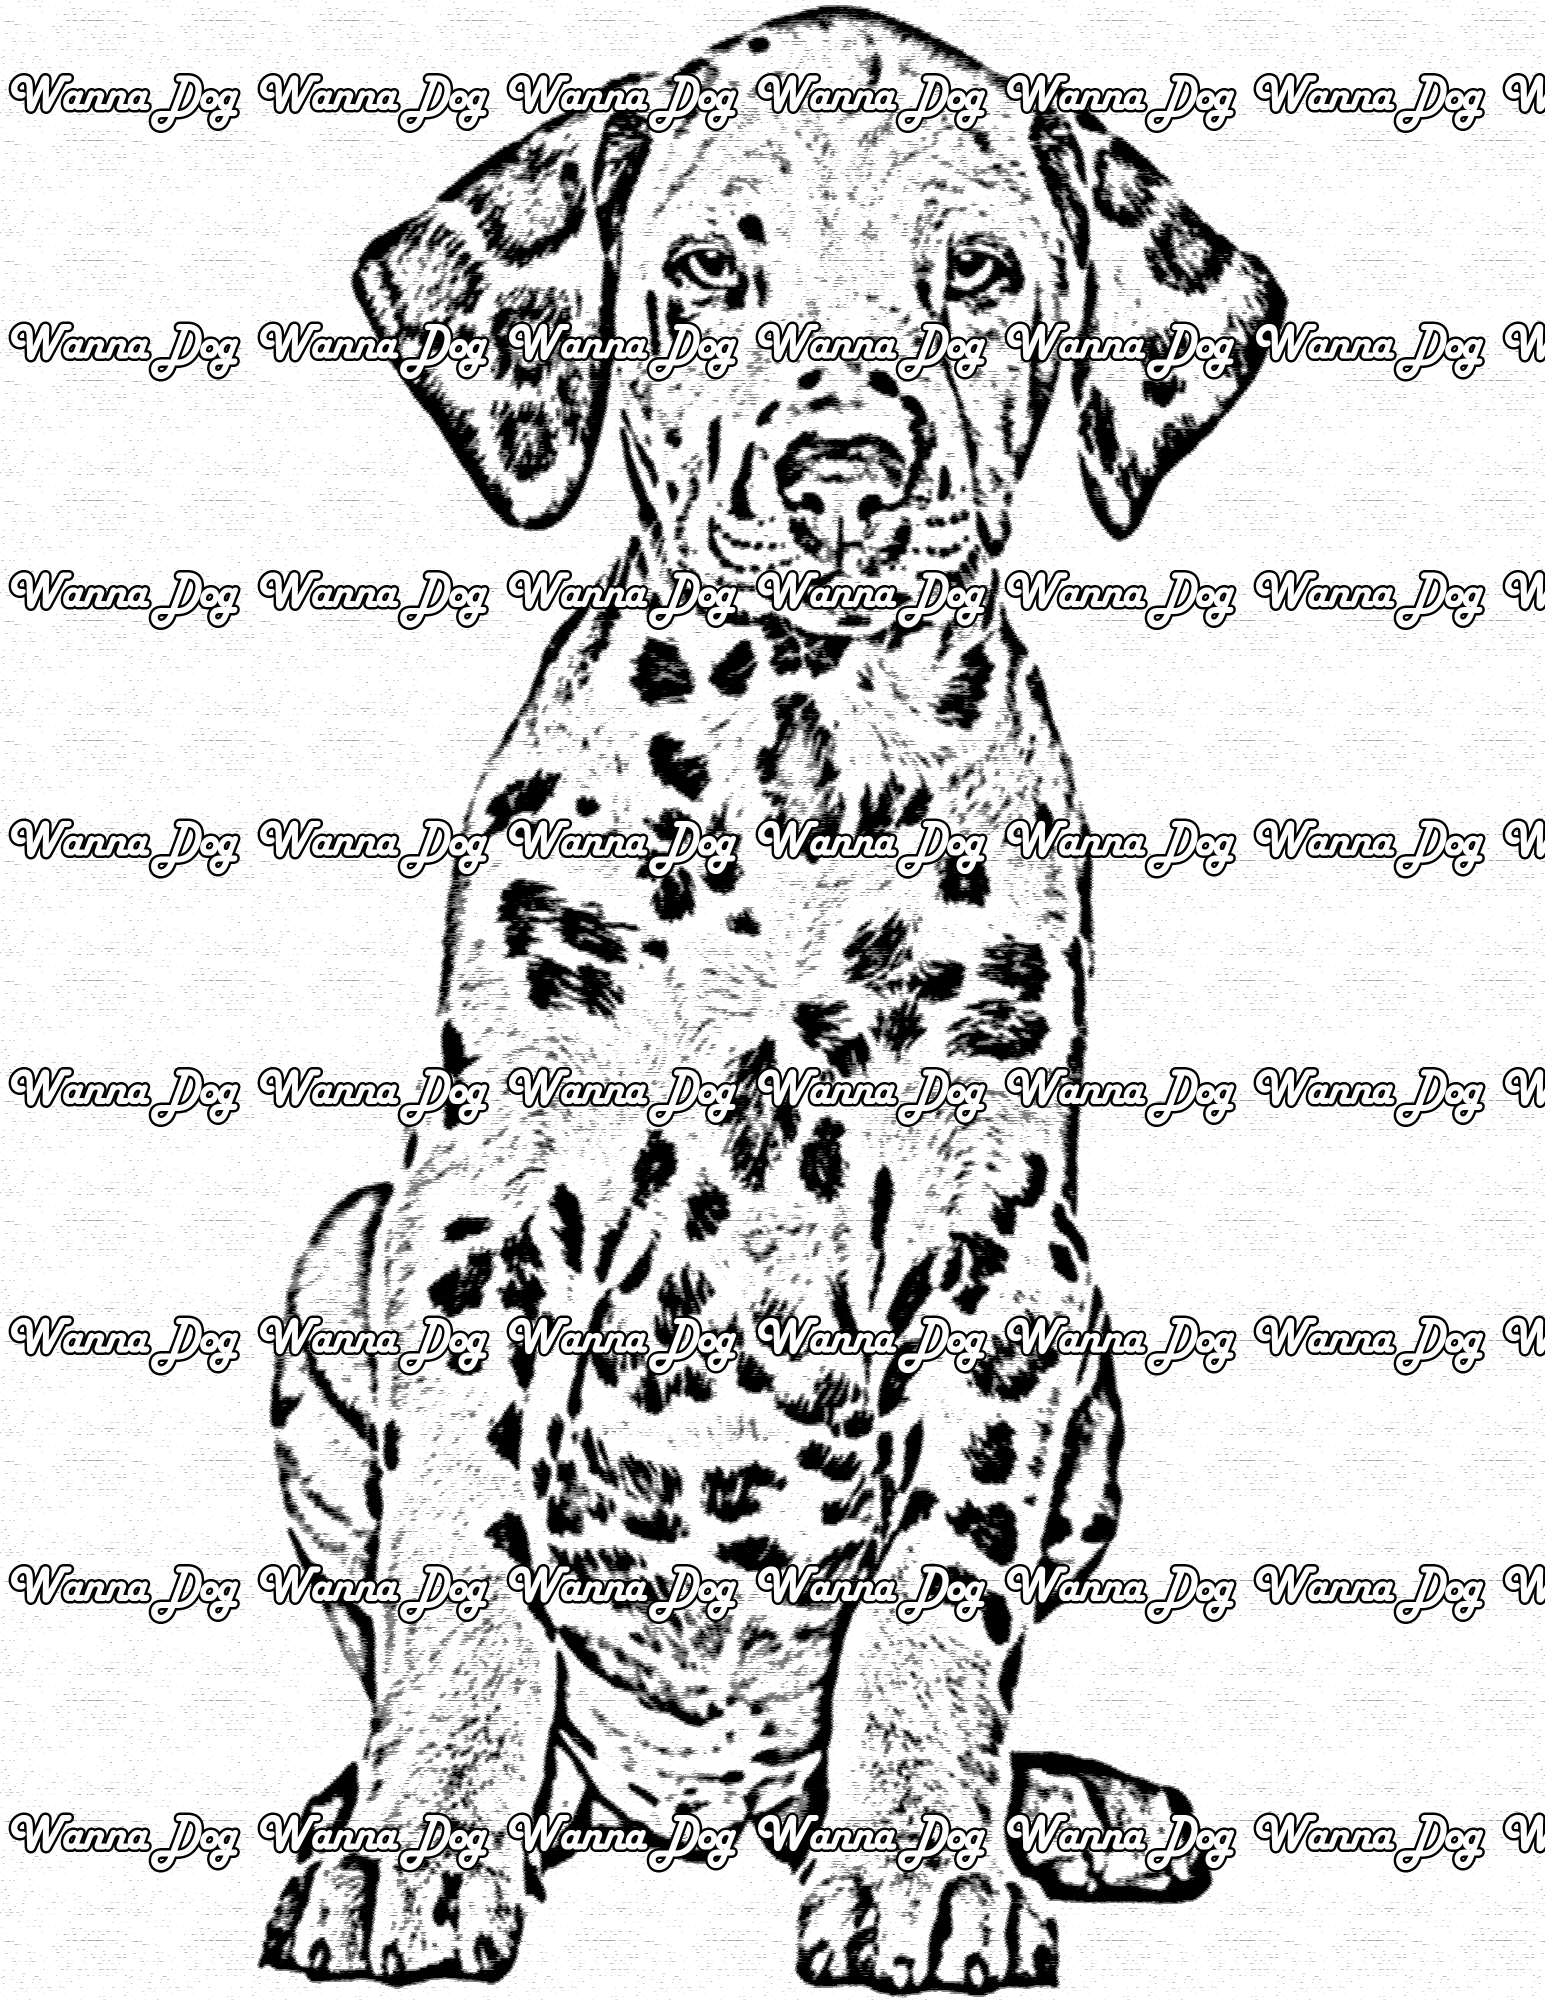 Dalmatian Puppy Coloring Page of a Dalmatian Puppy sitting and posing